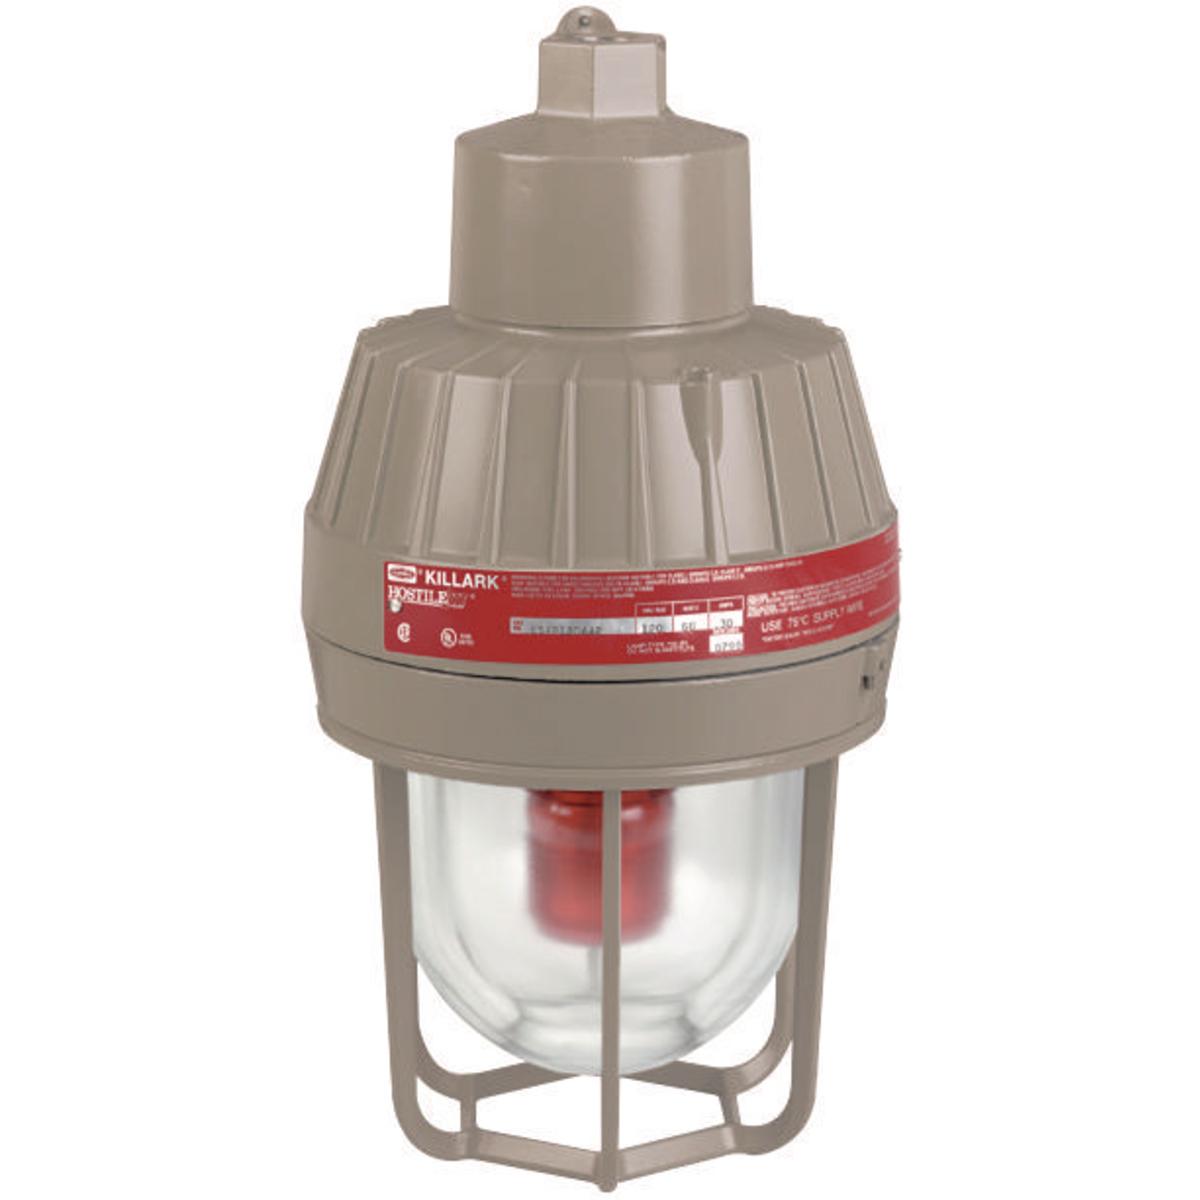 Hubbell ESXR1274A3 Class I 12-74VDC Red Strobe, 1" Pendant  ; Electronic component temperature range –40˚C to +55˚C ; NEC temperature code, T6 ( ; Flash rate–85 flashes per minute ; Xenon type lamp ; Voltage and amperage: 12-74 VDC: Draws 1.25A avg. @ 12 VDC tapering to 0.2